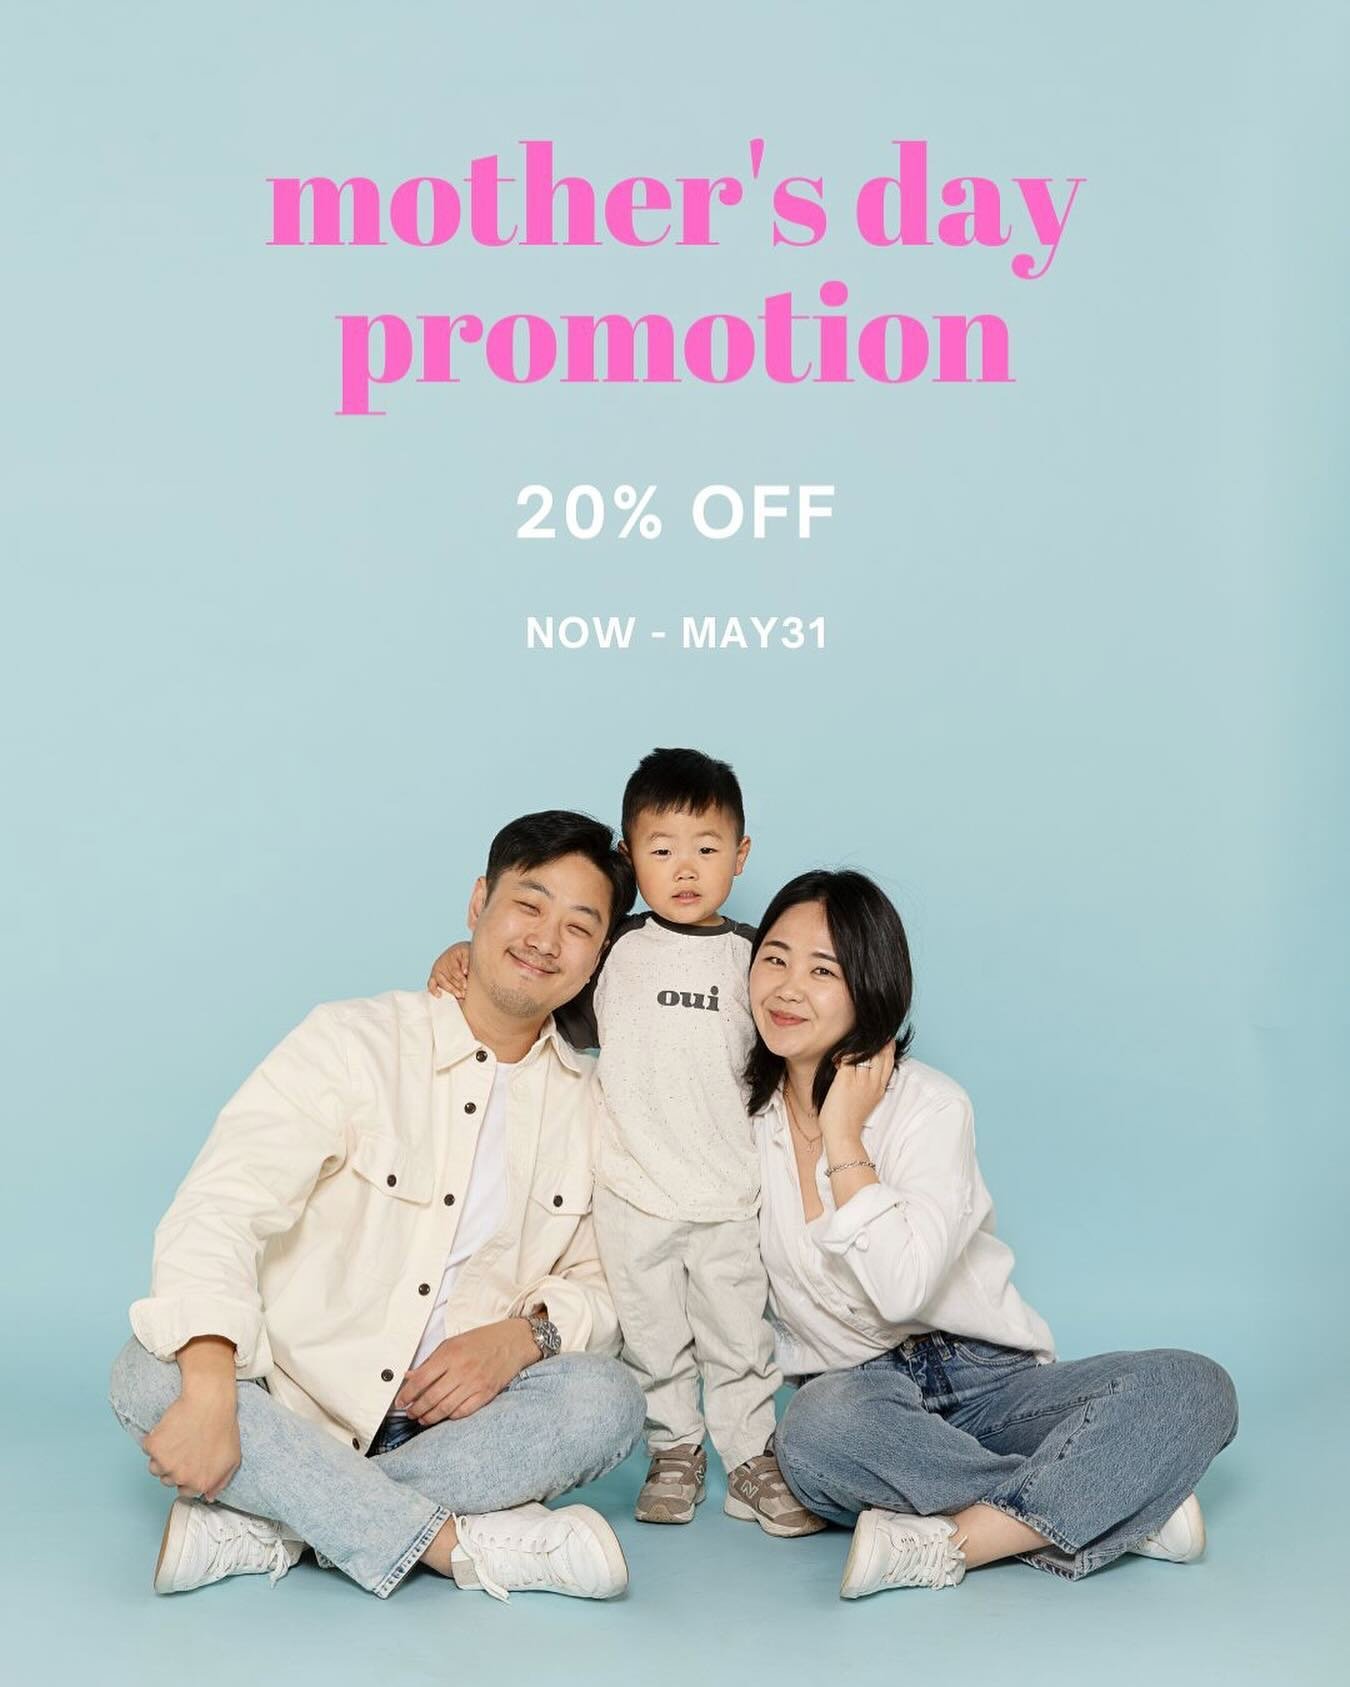 This May, celebrate Mom in style💖 Book a session with us and get 20% off when you bring your mom, your fur baby🐕🐱, or if you&rsquo;re expecting🤰🫶 Capture the love and laughter of Mother&rsquo;s Day at Say cheese💛